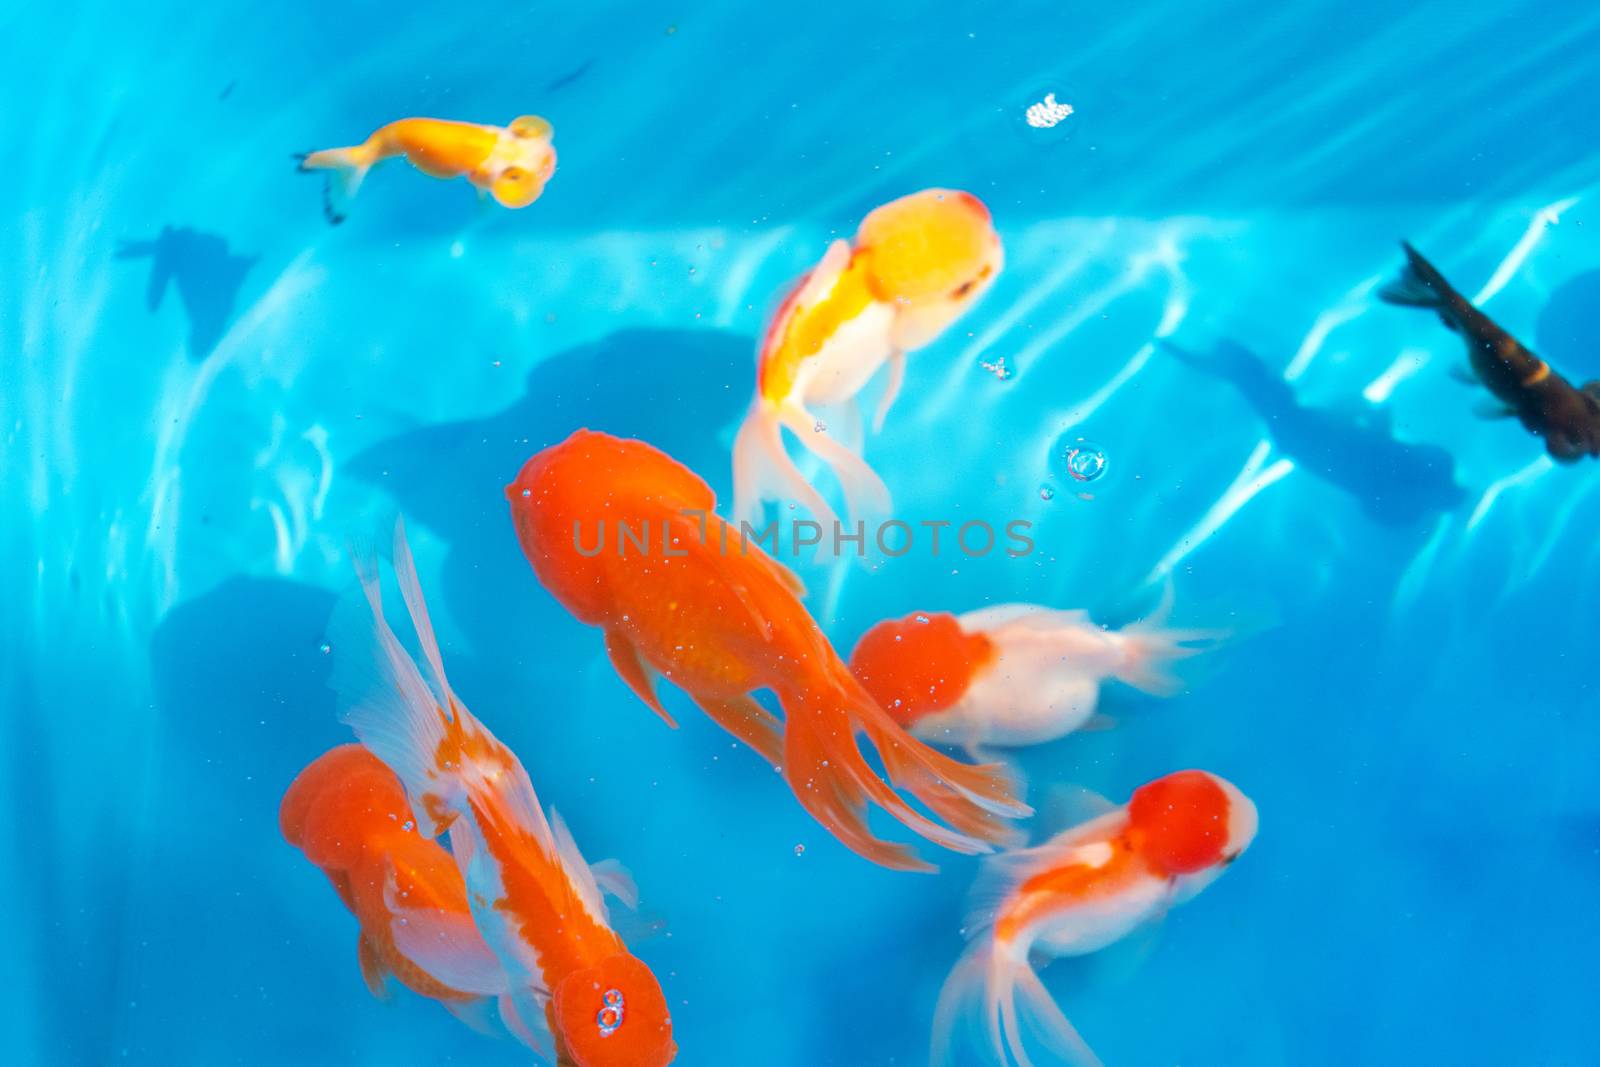 Colored tropical fish in a decorative pond. Orange decorative fish on a blue background. Flock of ornamental fish by Try_my_best